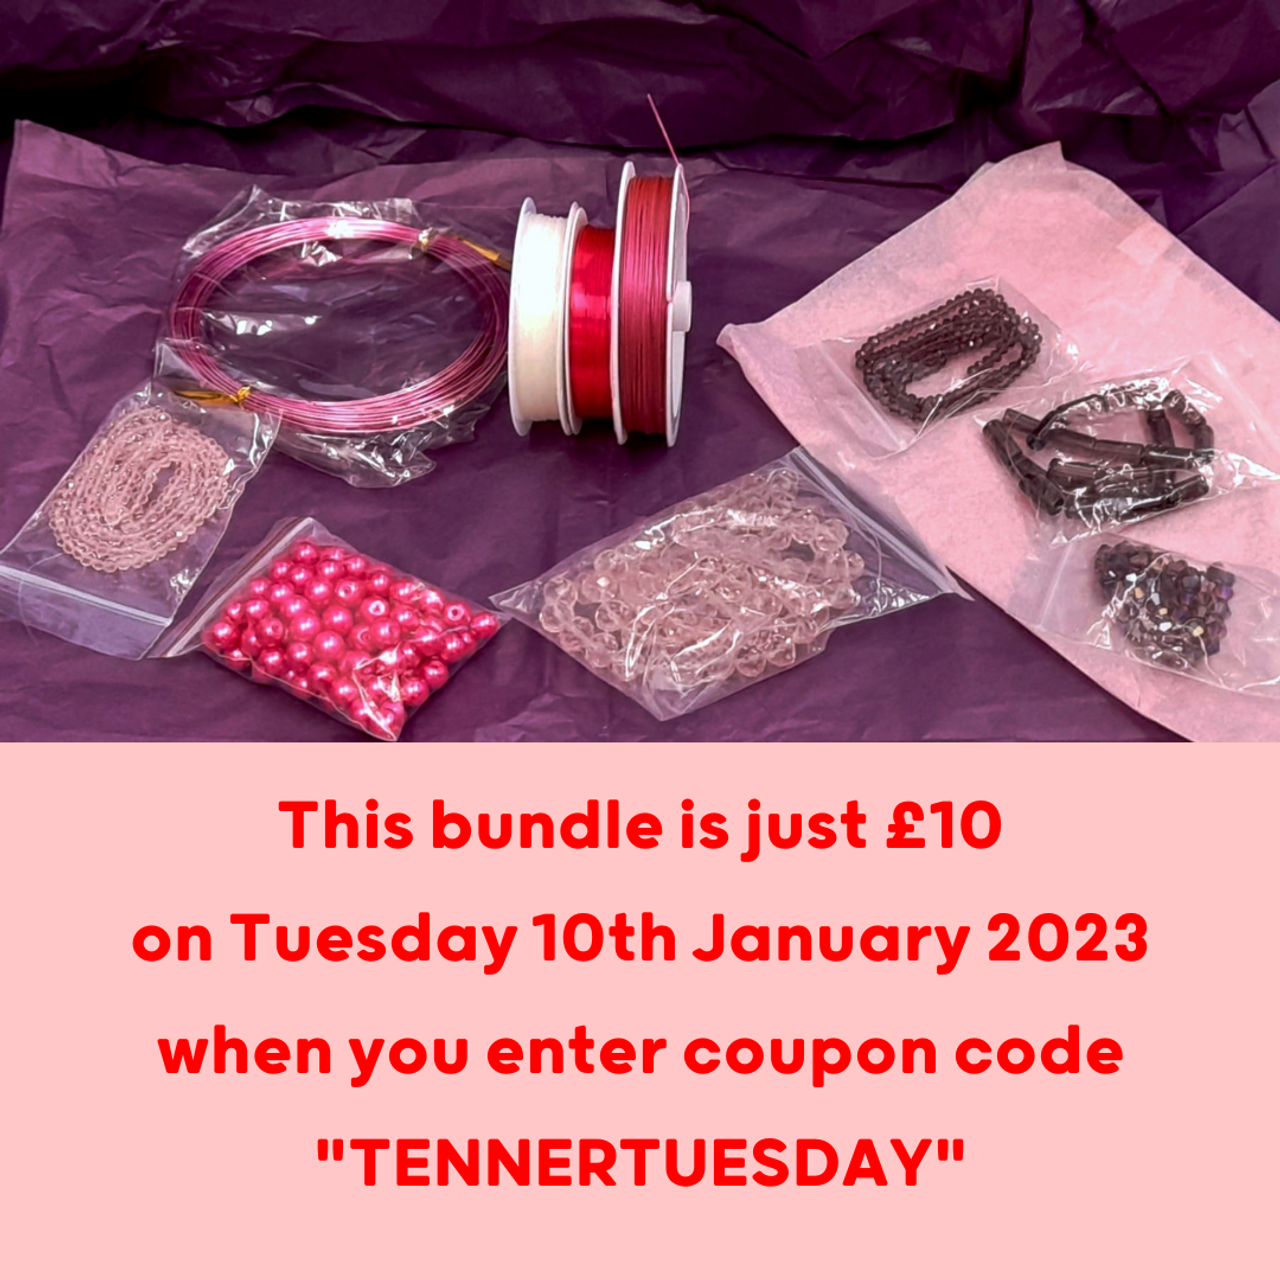 This bundle is just £10 on Tuesday 10th January 2023 when you enter coupon code "TENNERTUESDAY"